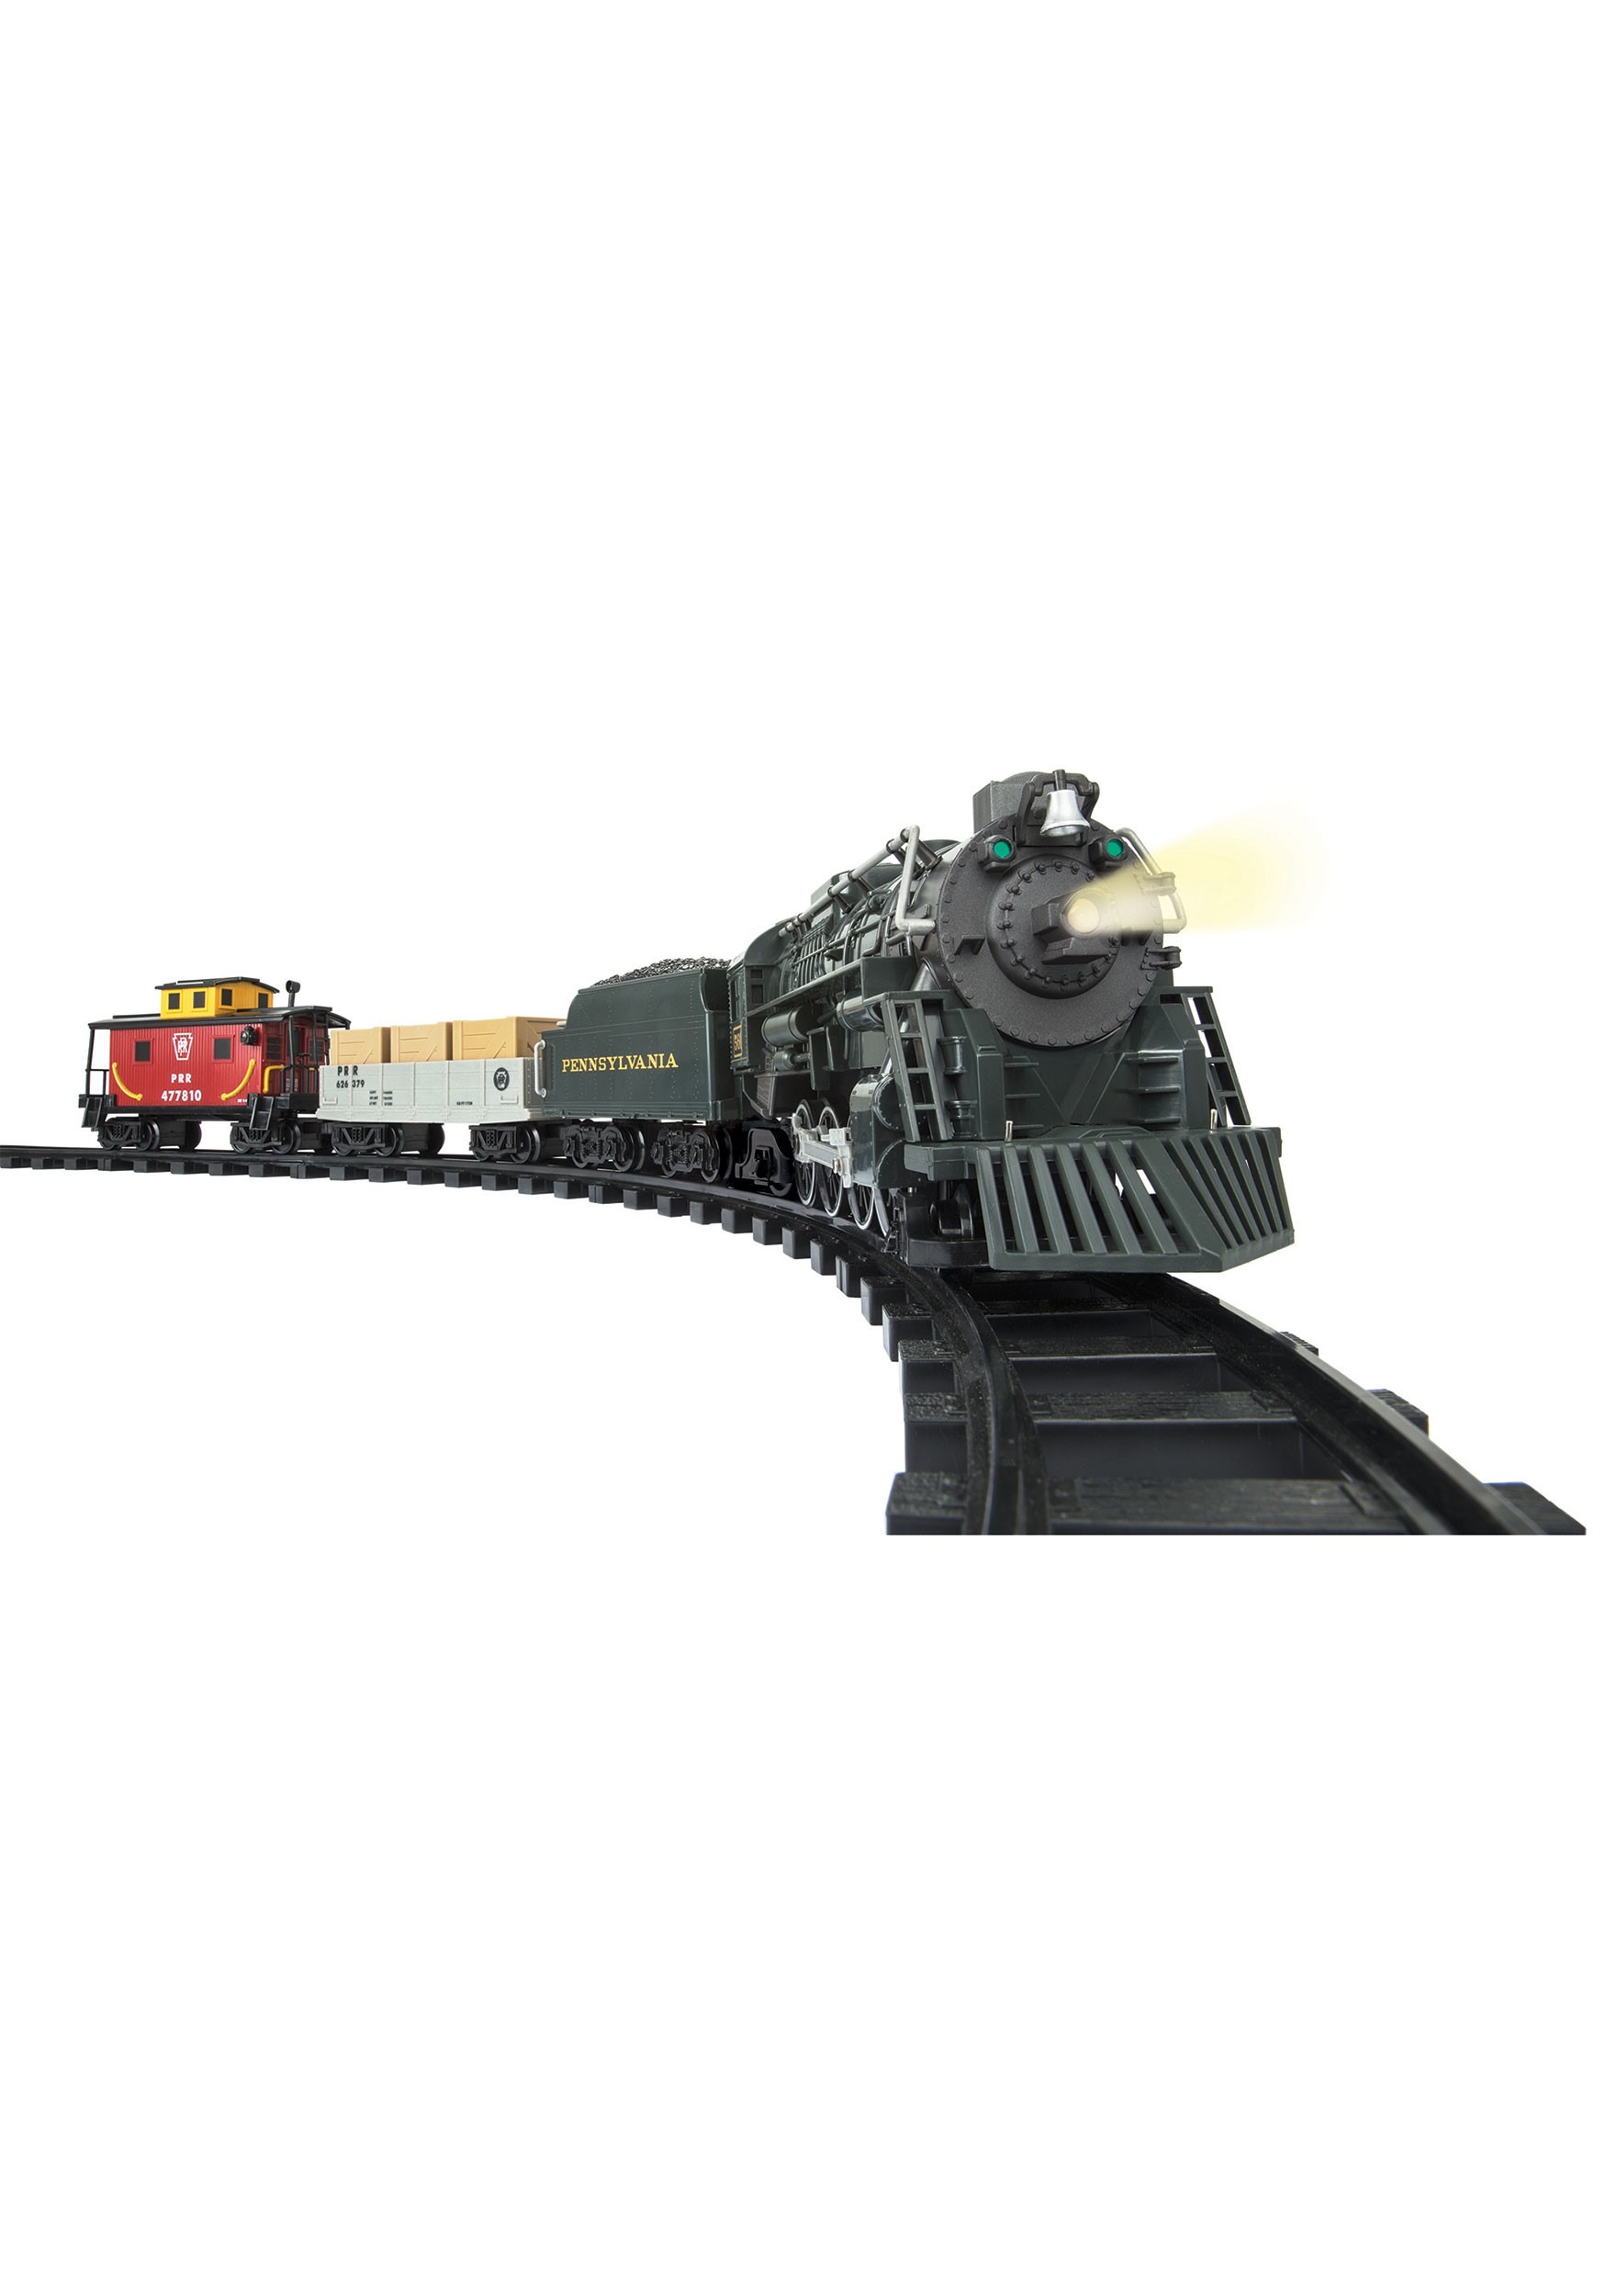 Lionel Pennsylvania Flyer Ready-to-Play Freight Train Set